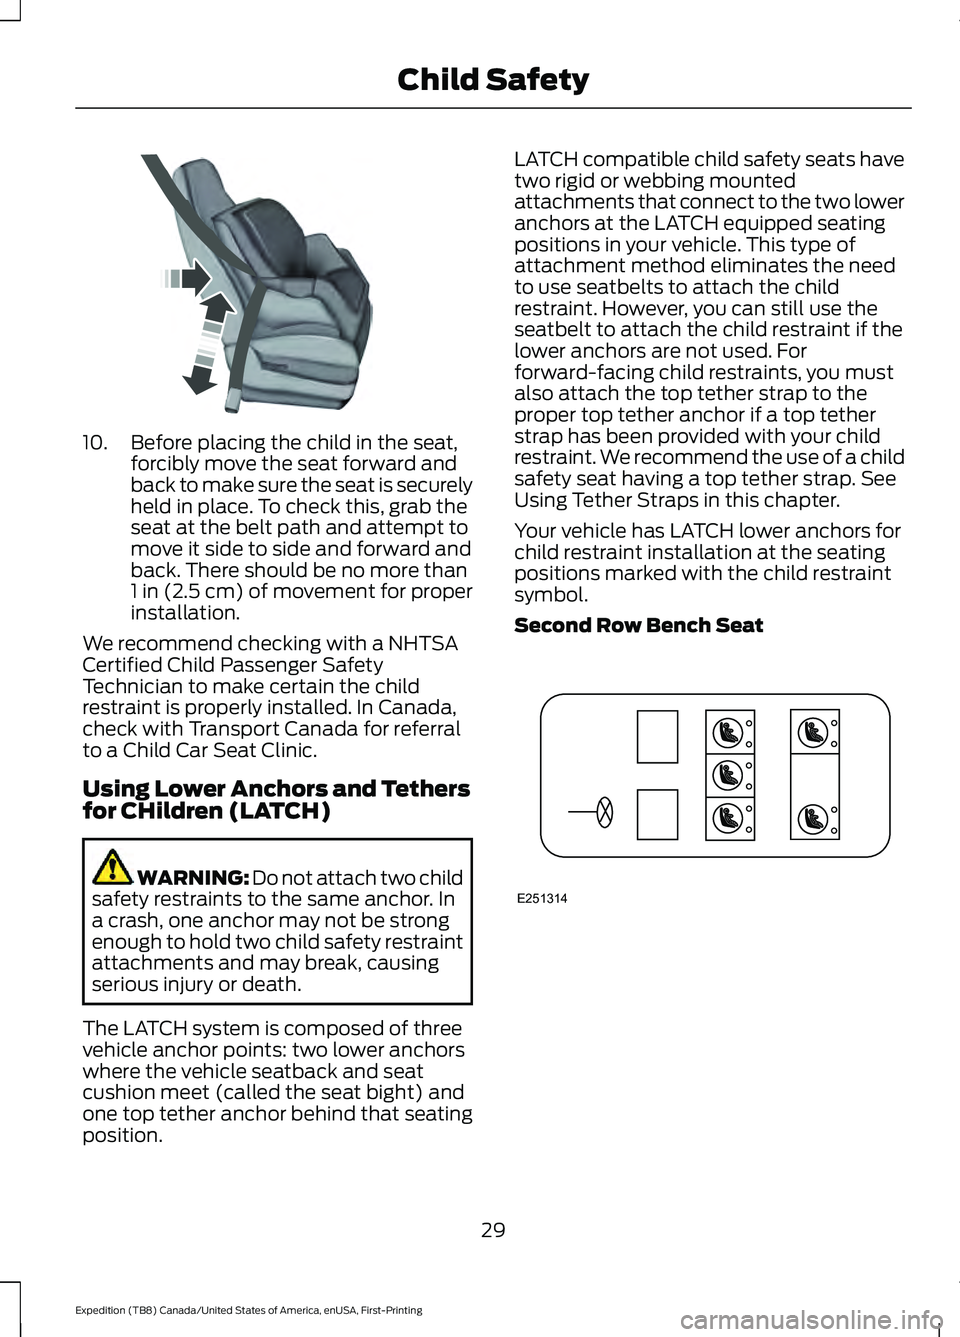 FORD EXPEDITION 2021 Owners Guide 10. Before placing the child in the seat,
forcibly move the seat forward and
back to make sure the seat is securely
held in place. To check this, grab the
seat at the belt path and attempt to
move it 